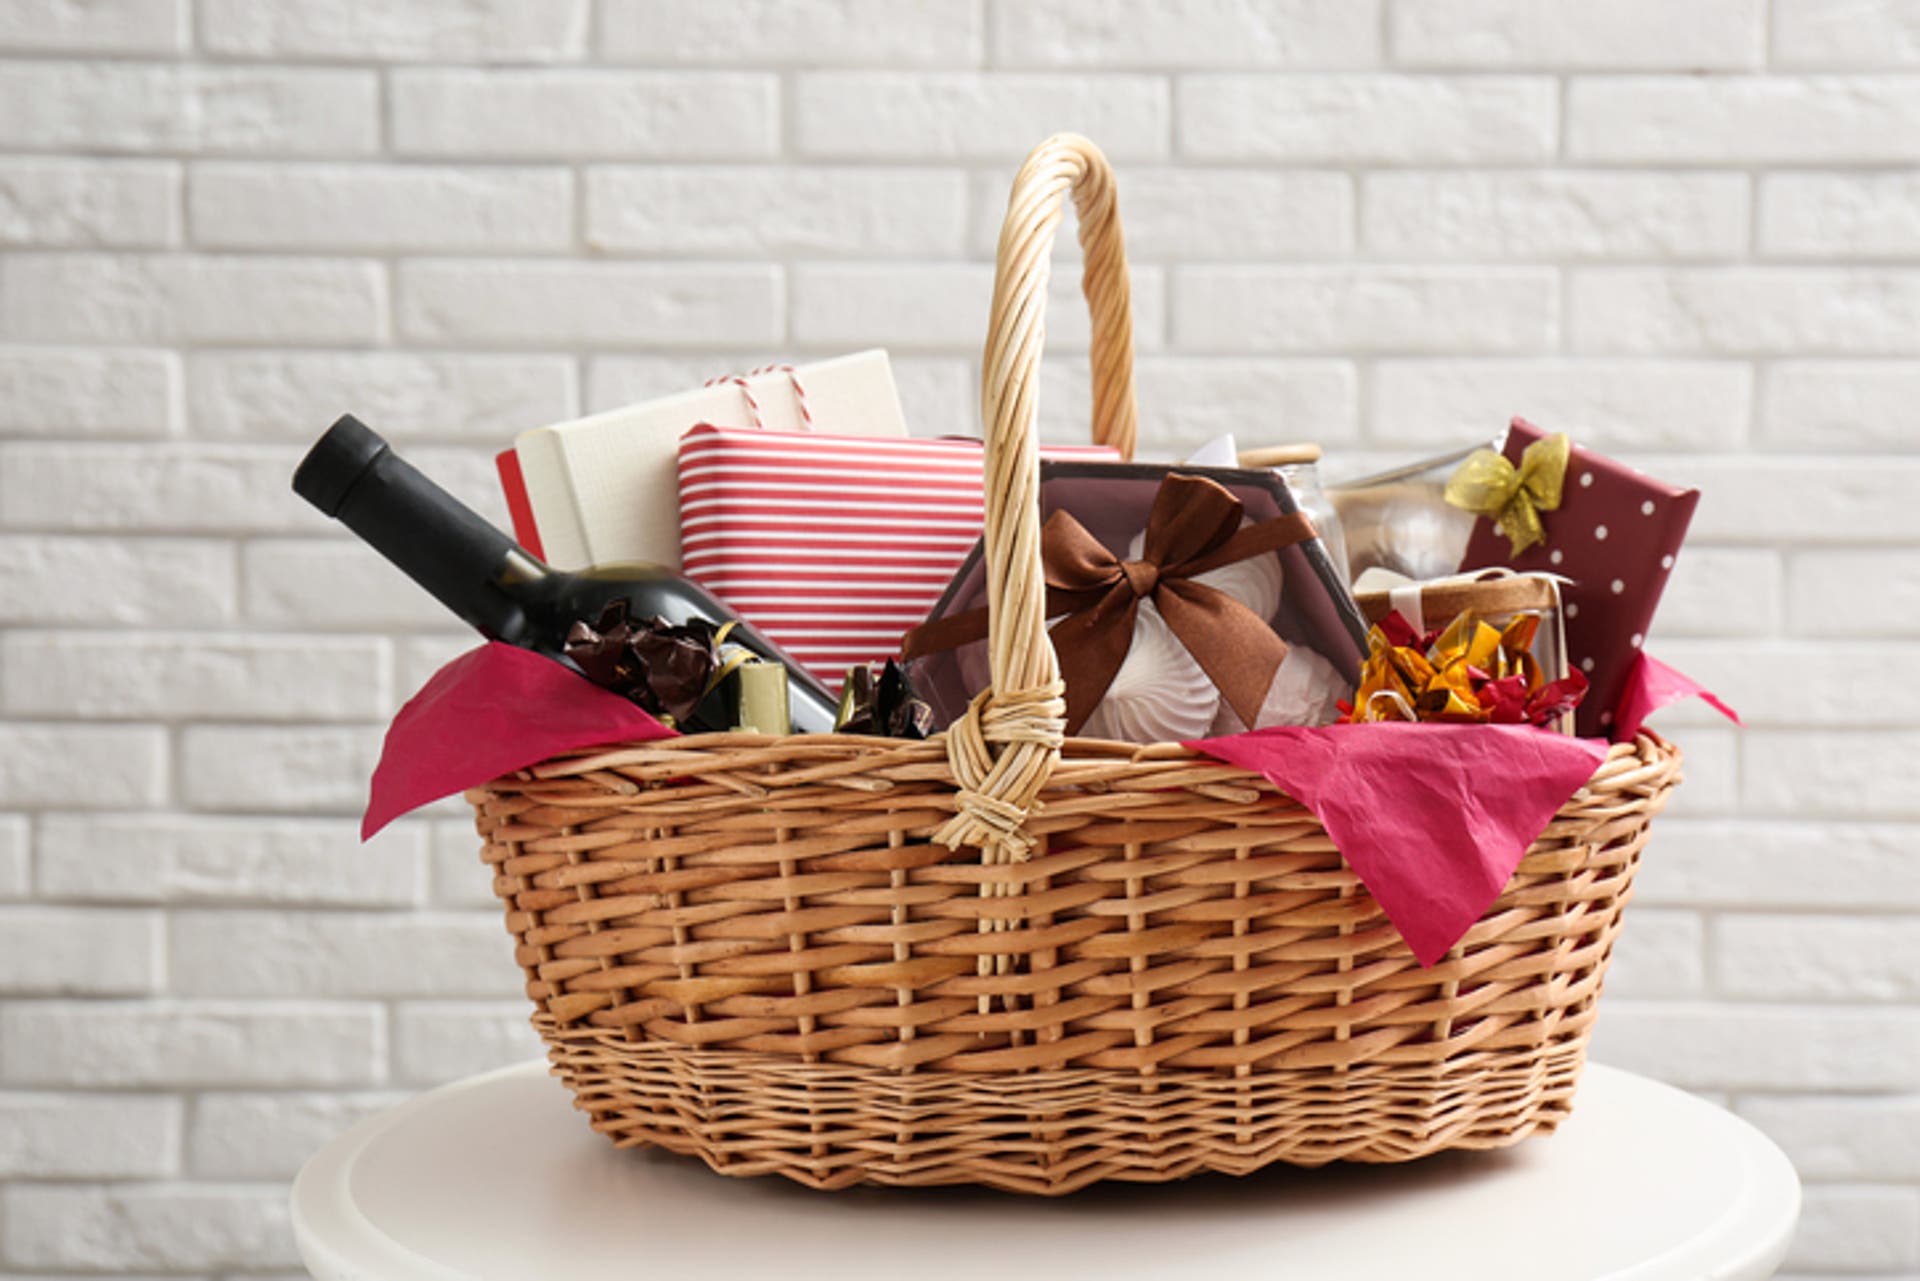  Wicker gift basket with bottle of wine on table near white brick wall 